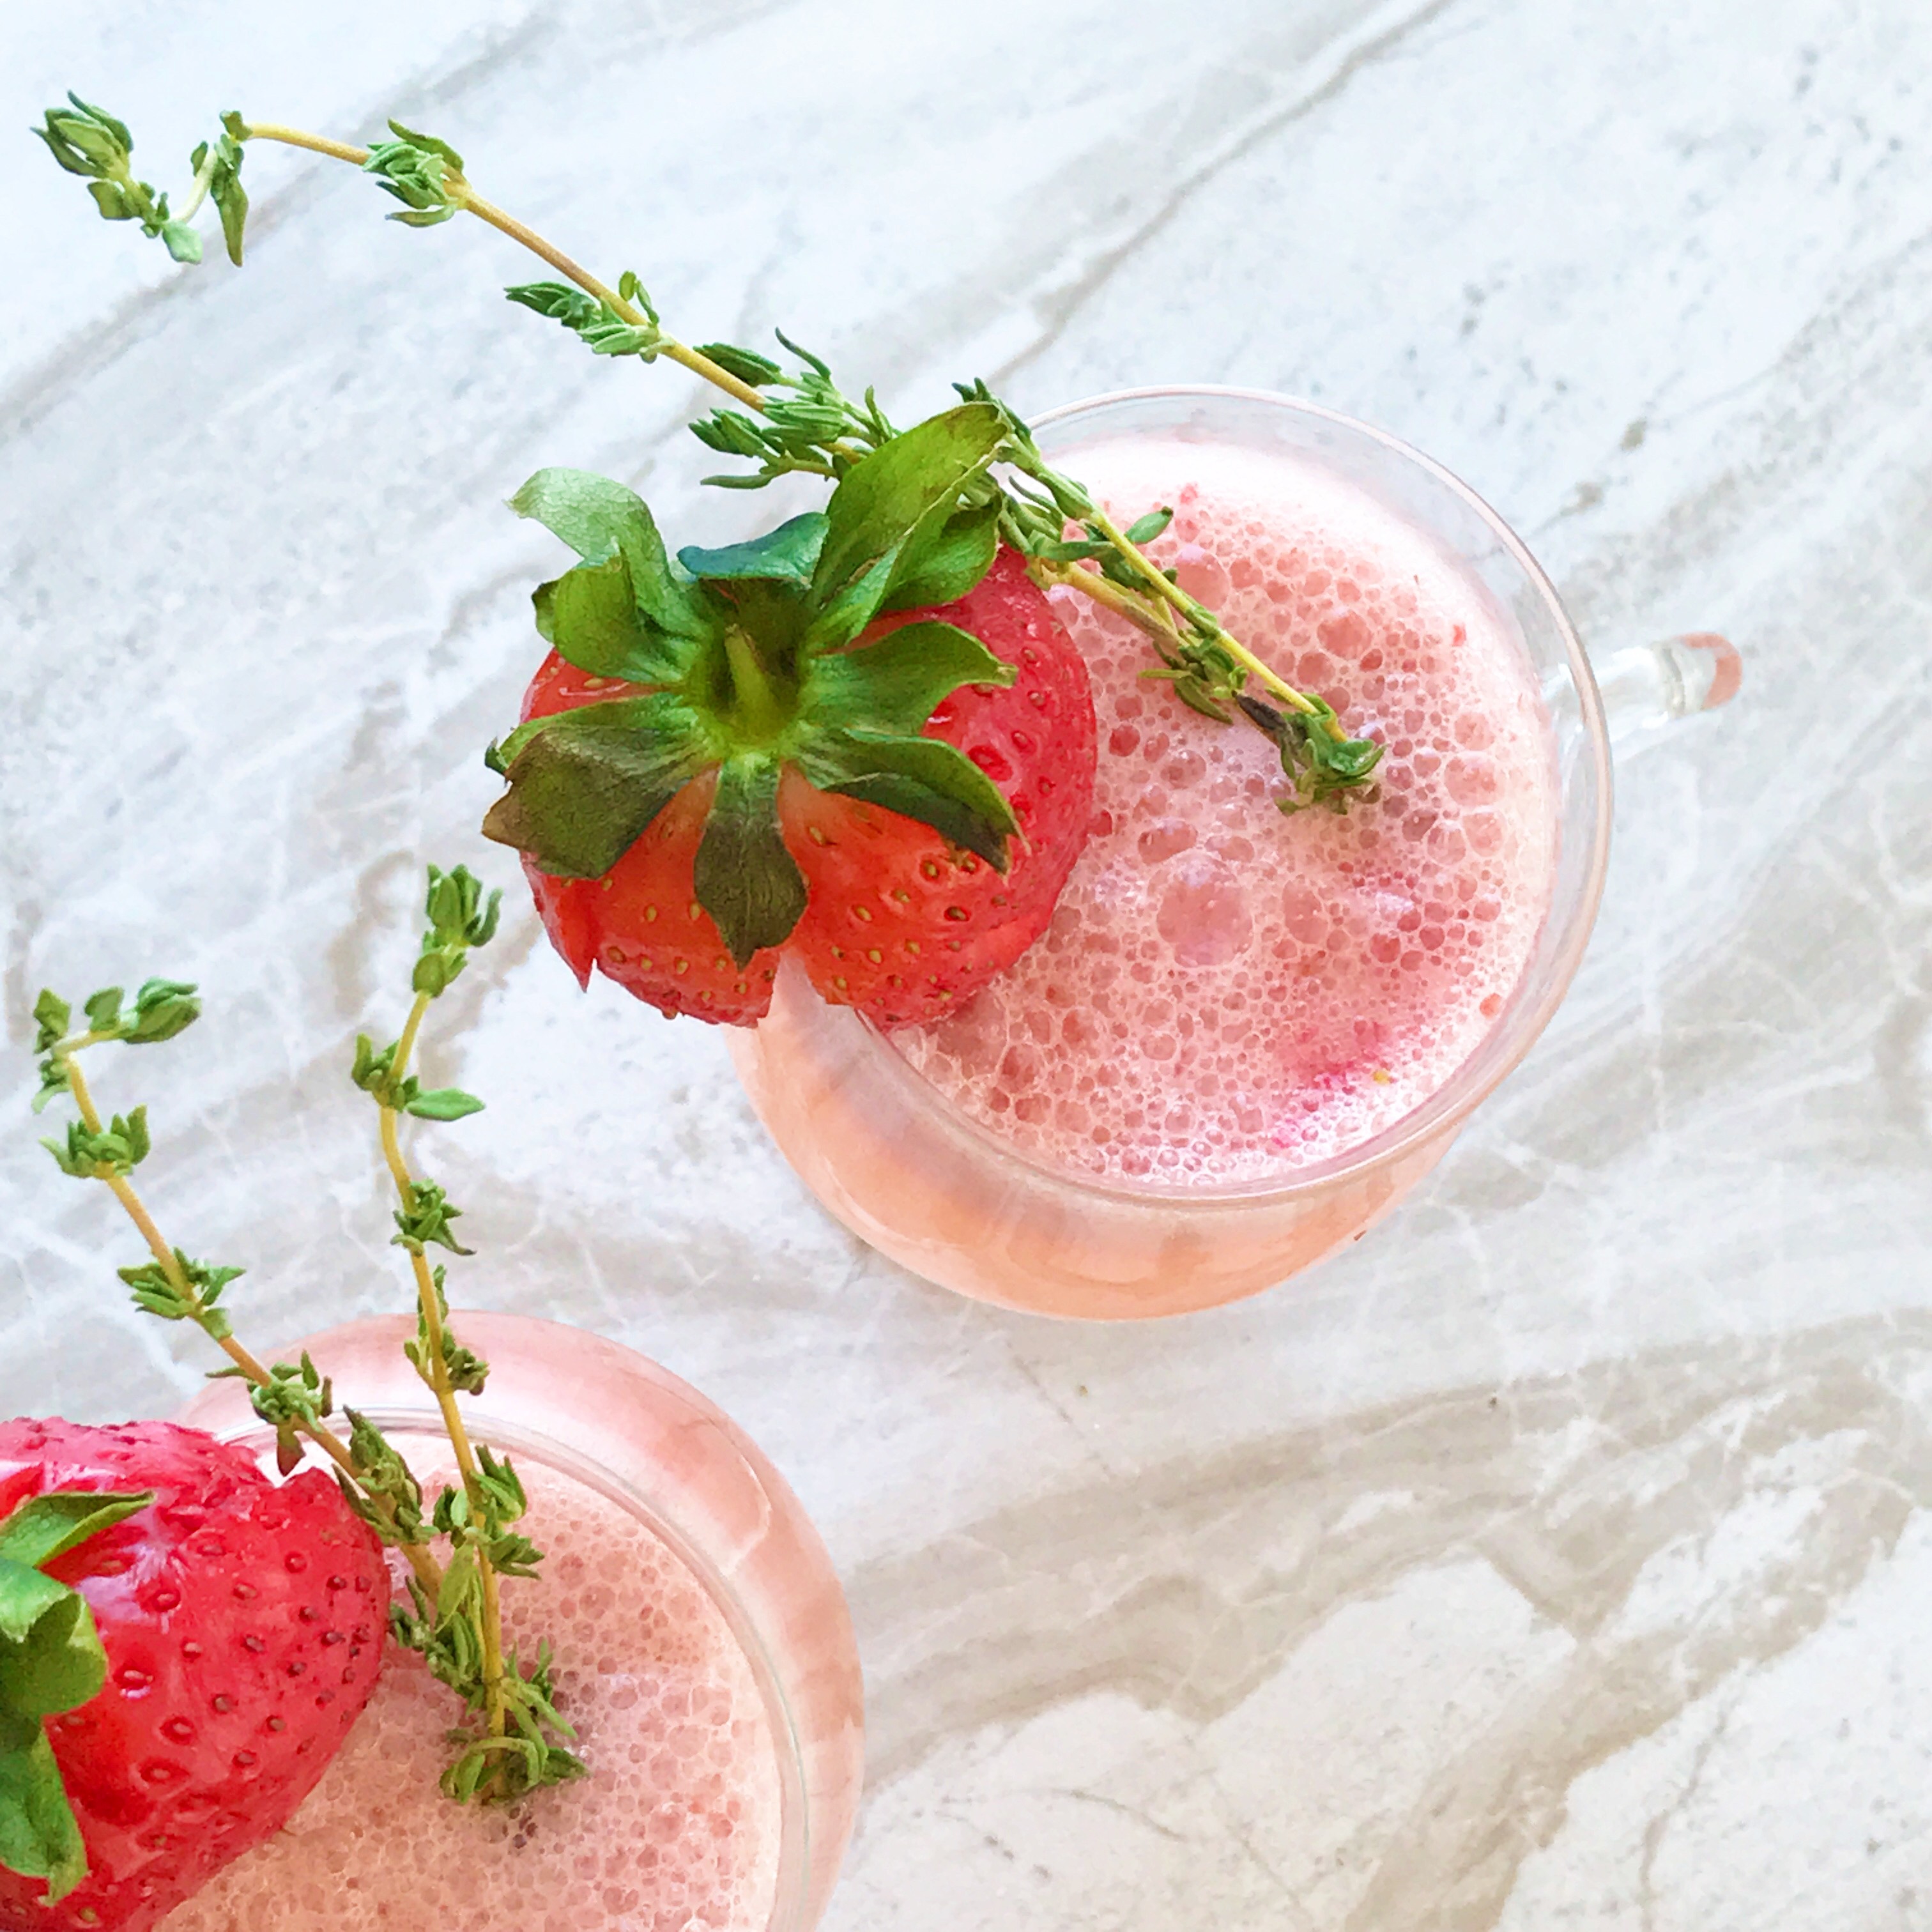 How to make your own lemonade at home with strawberries and coconut water